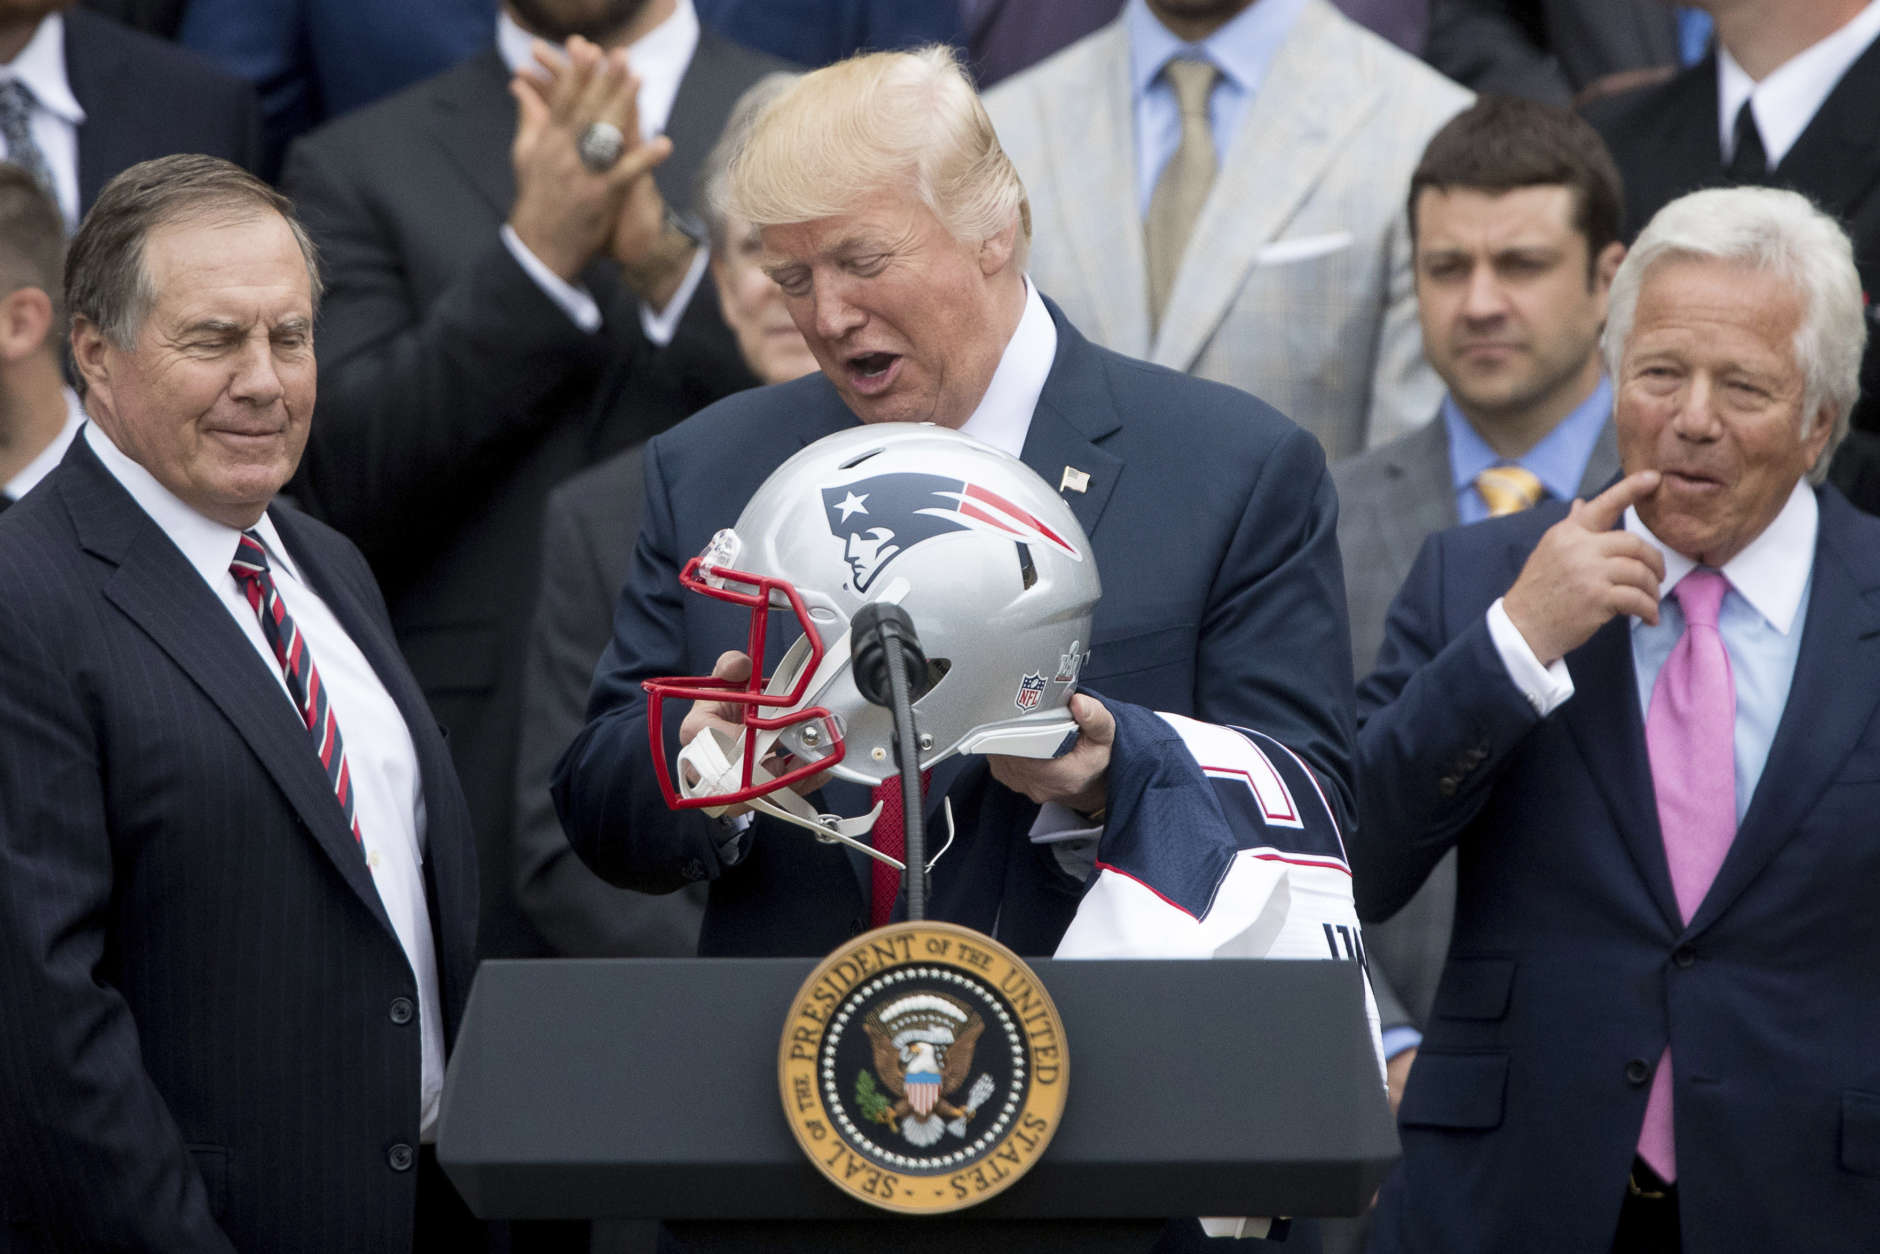 New England Patriots head coach Bill Belichick (left) and owner Robert Kraft presented President Donald Trump with a helmet and jersey during a ceremony to honor the Super Bowl champs April 19. (AP photo/Andrew Harnik)